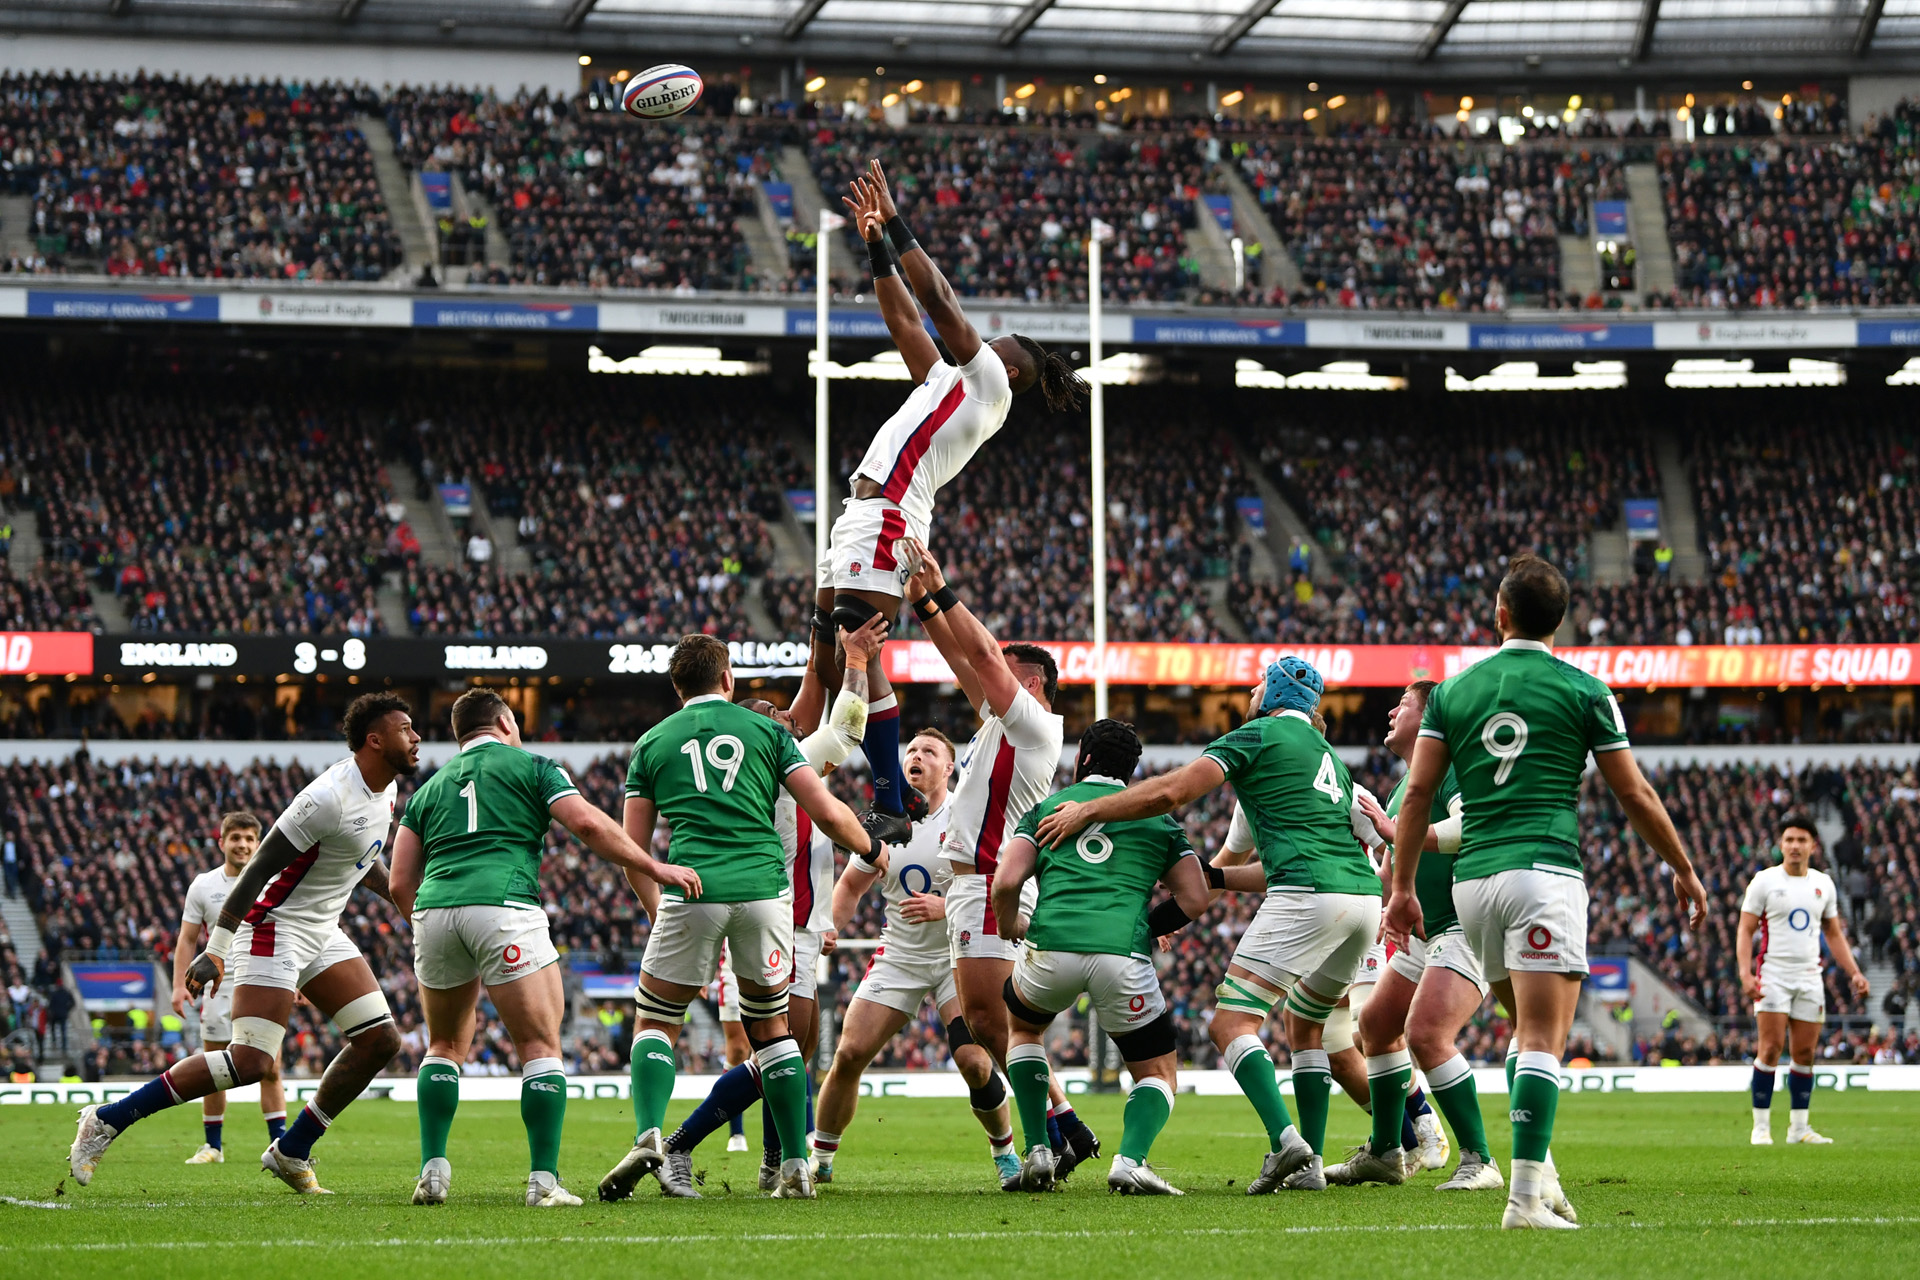 Maro Itoje of England jumps in the lineout during the Guinness Six Nations Rugby match between England and Ireland at Twickenham Stadium on March 12, 2022 in London, England